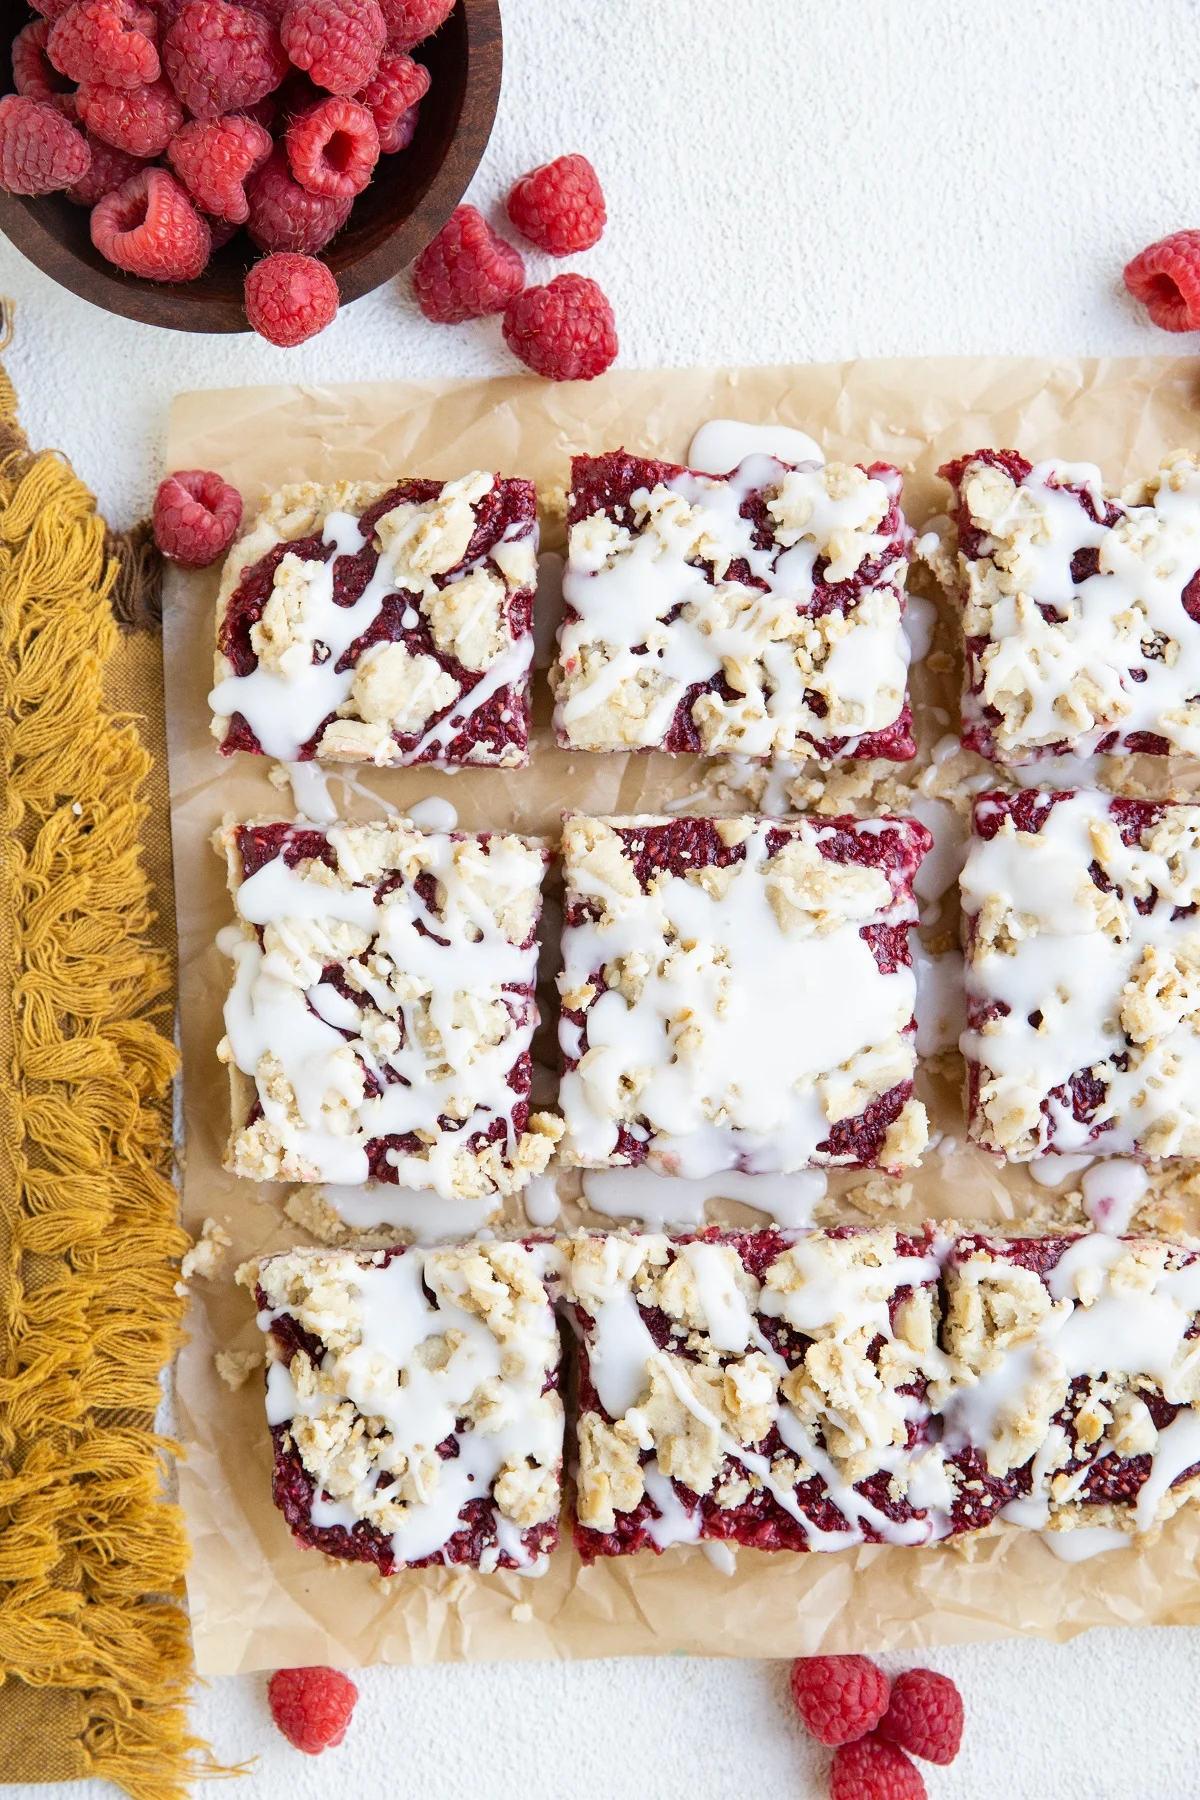 Raspberry crumb bars cut into squares on a sheet of parchment paper with fresh raspberries around.